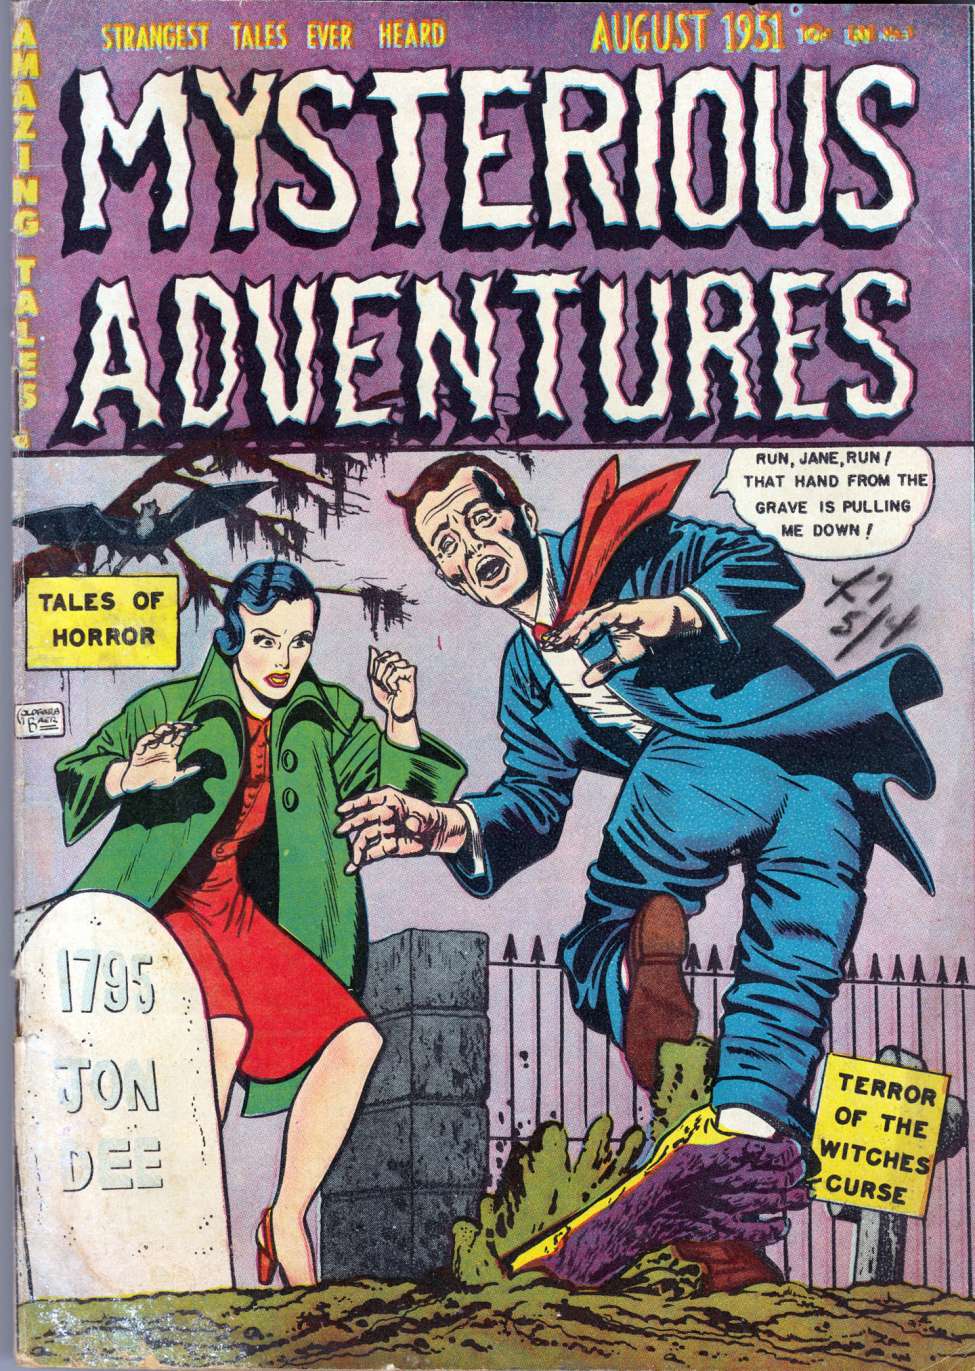 Book Cover For Mysterious Adventures 3 (alt) - Version 2